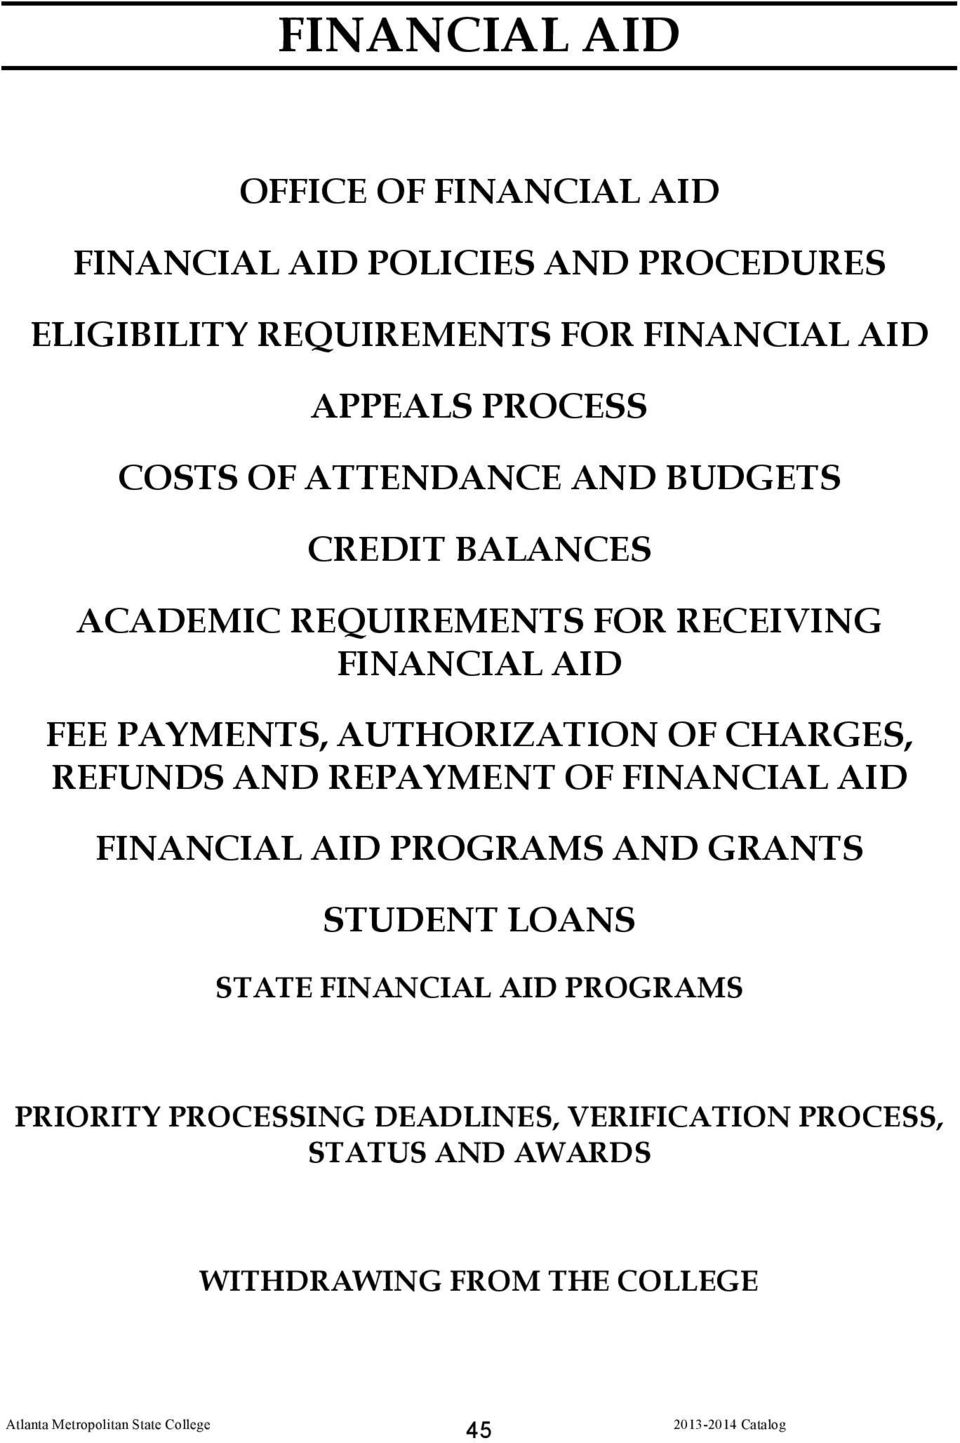 PAYMENTS, AUTHORIZATION OF CHARGES, REFUNDS AND REPAYMENT OF FINANCIAL AID FINANCIAL AID PROGRAMS AND GRANTS STUDENT LOANS